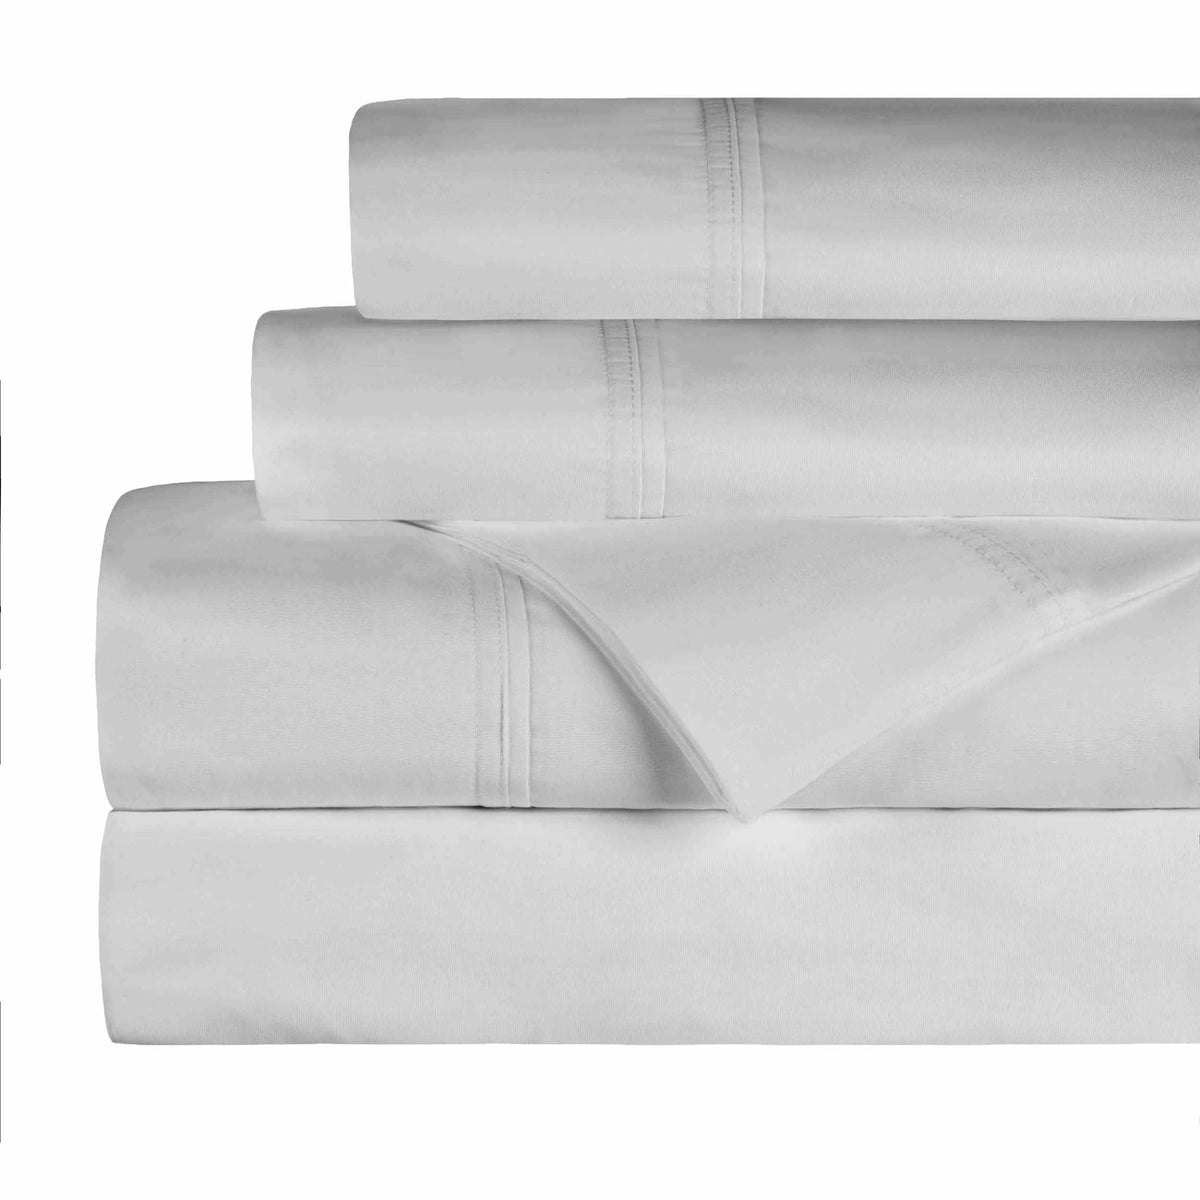 Organic Cotton Deep Pocket Fitted Sheet Twin Size - Natural